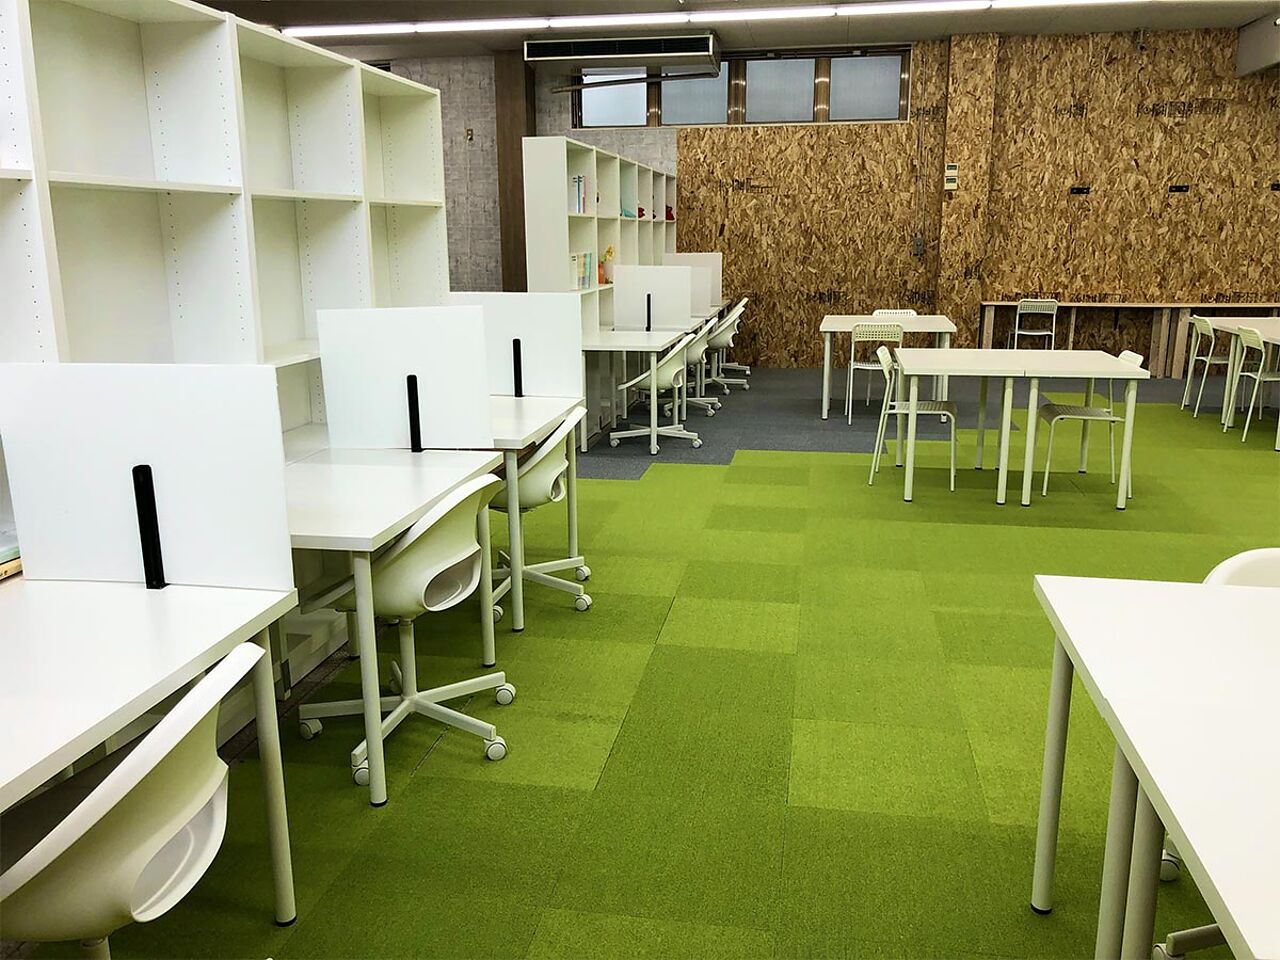 「Tokushima co learning Space」の教室内画像